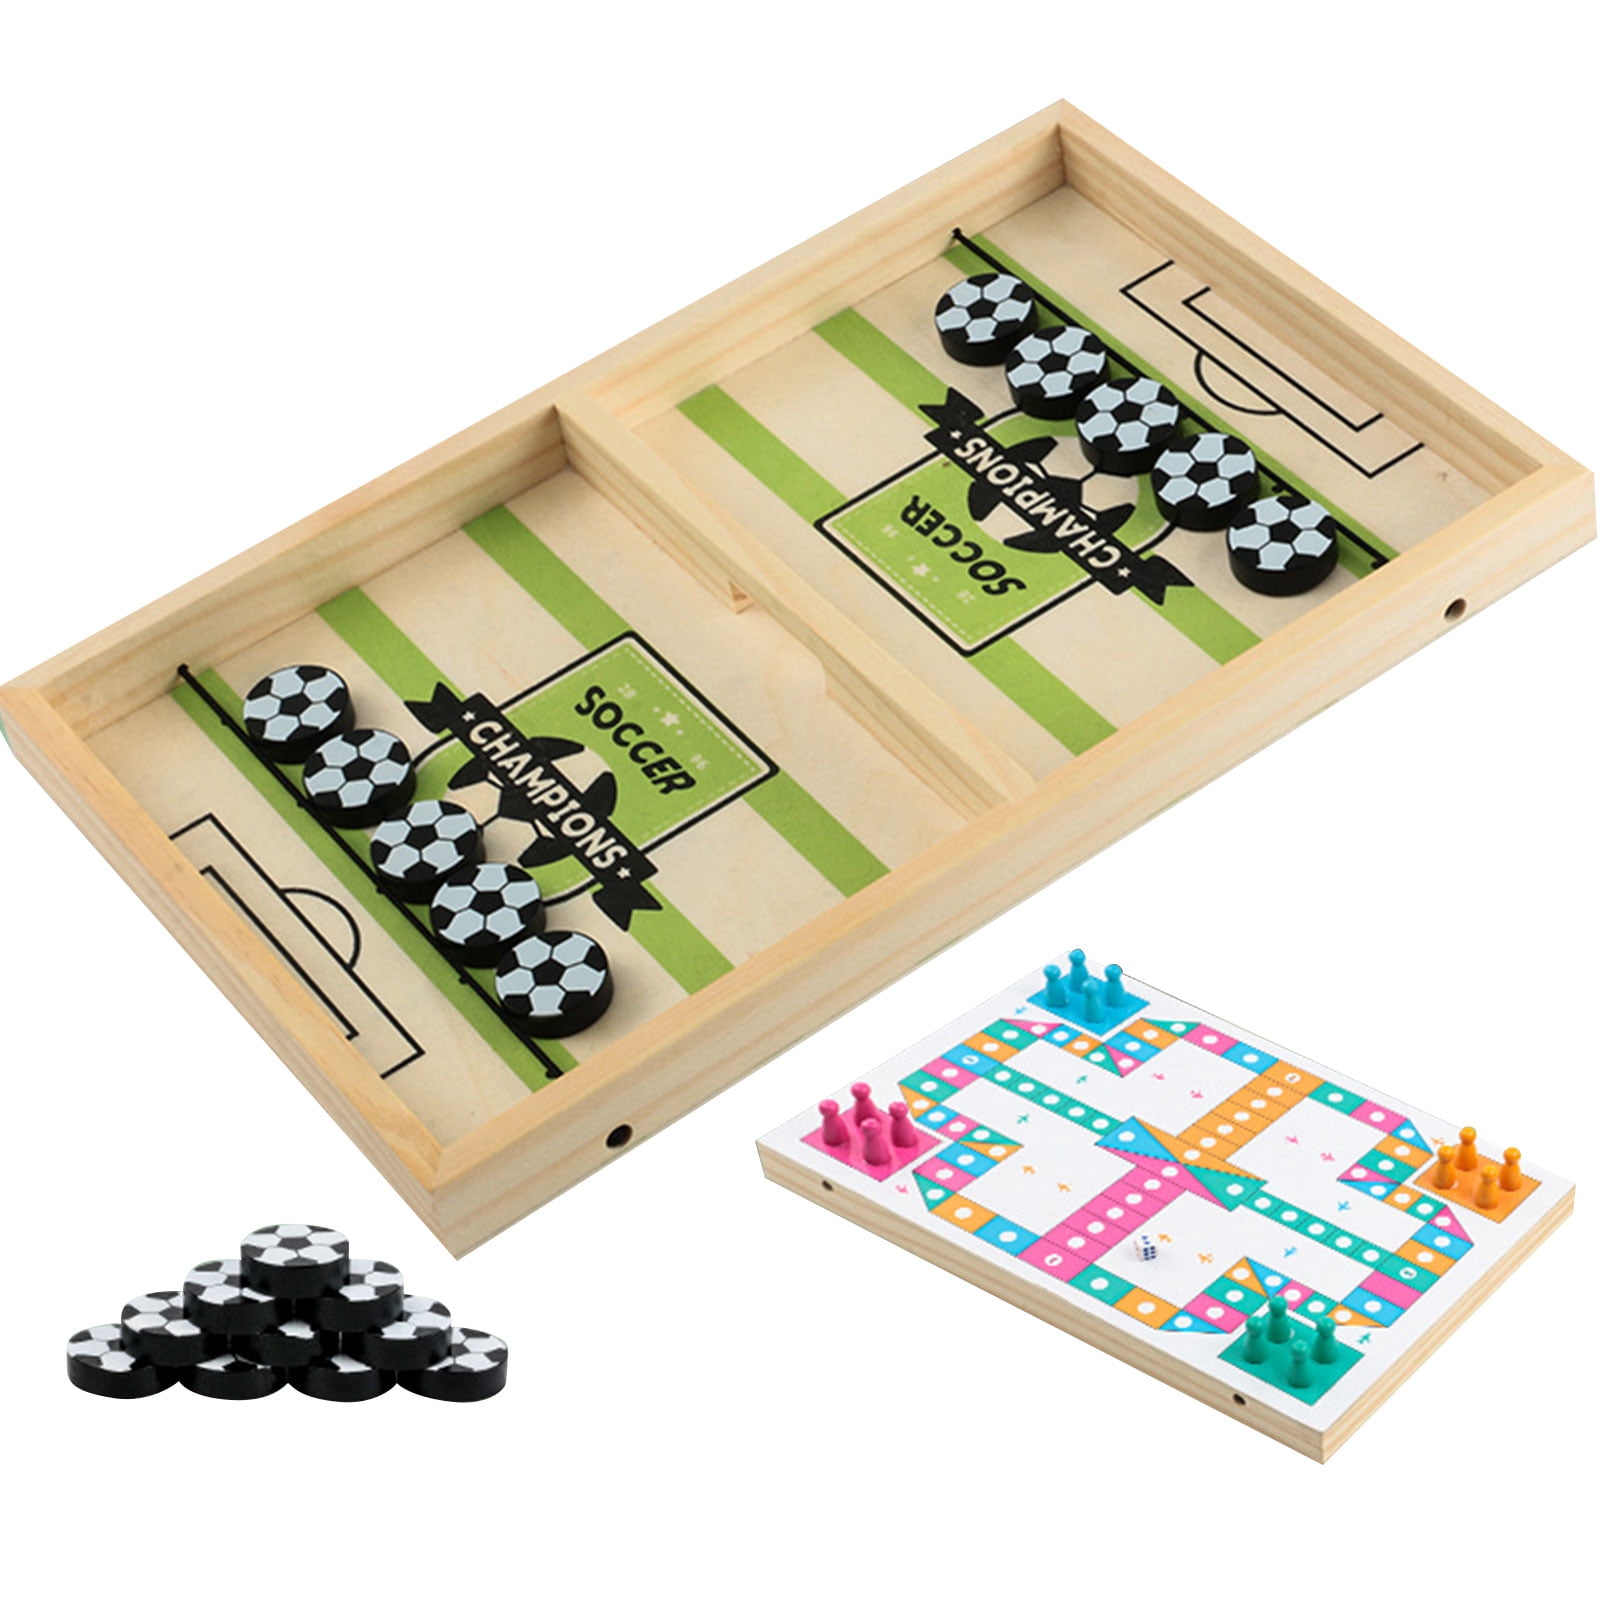 Details about   Hockey Game Wooden Fast Sling Puck Game Board Game Soccer Battle Flying Chess 